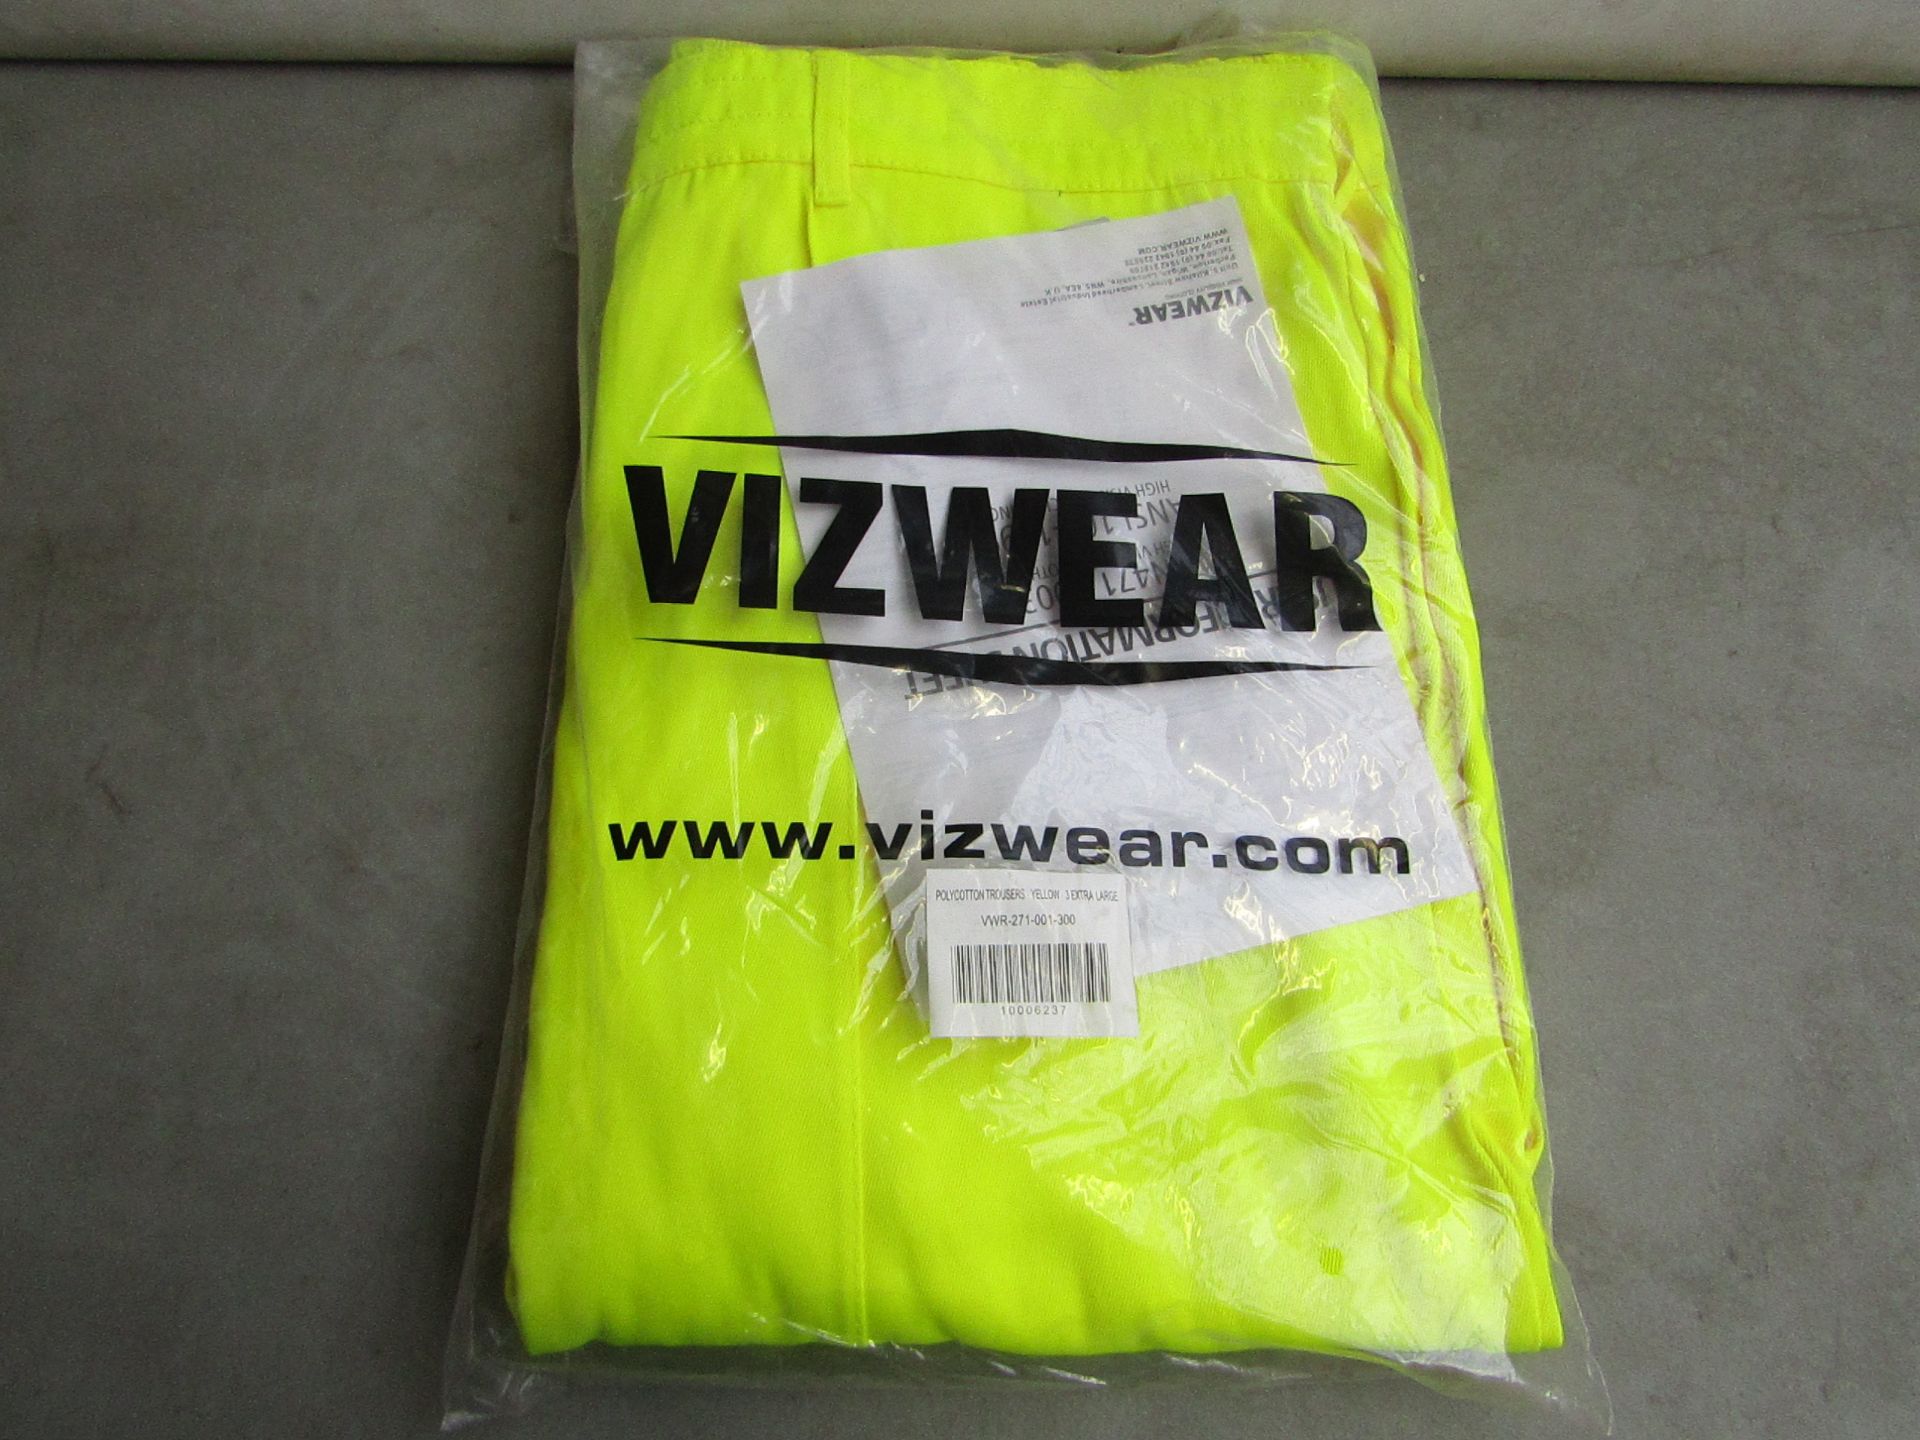 2x Vizwear - Hi-Vis Yellow Polycotton Trousers - Size 3XL - Unused & Packaged.